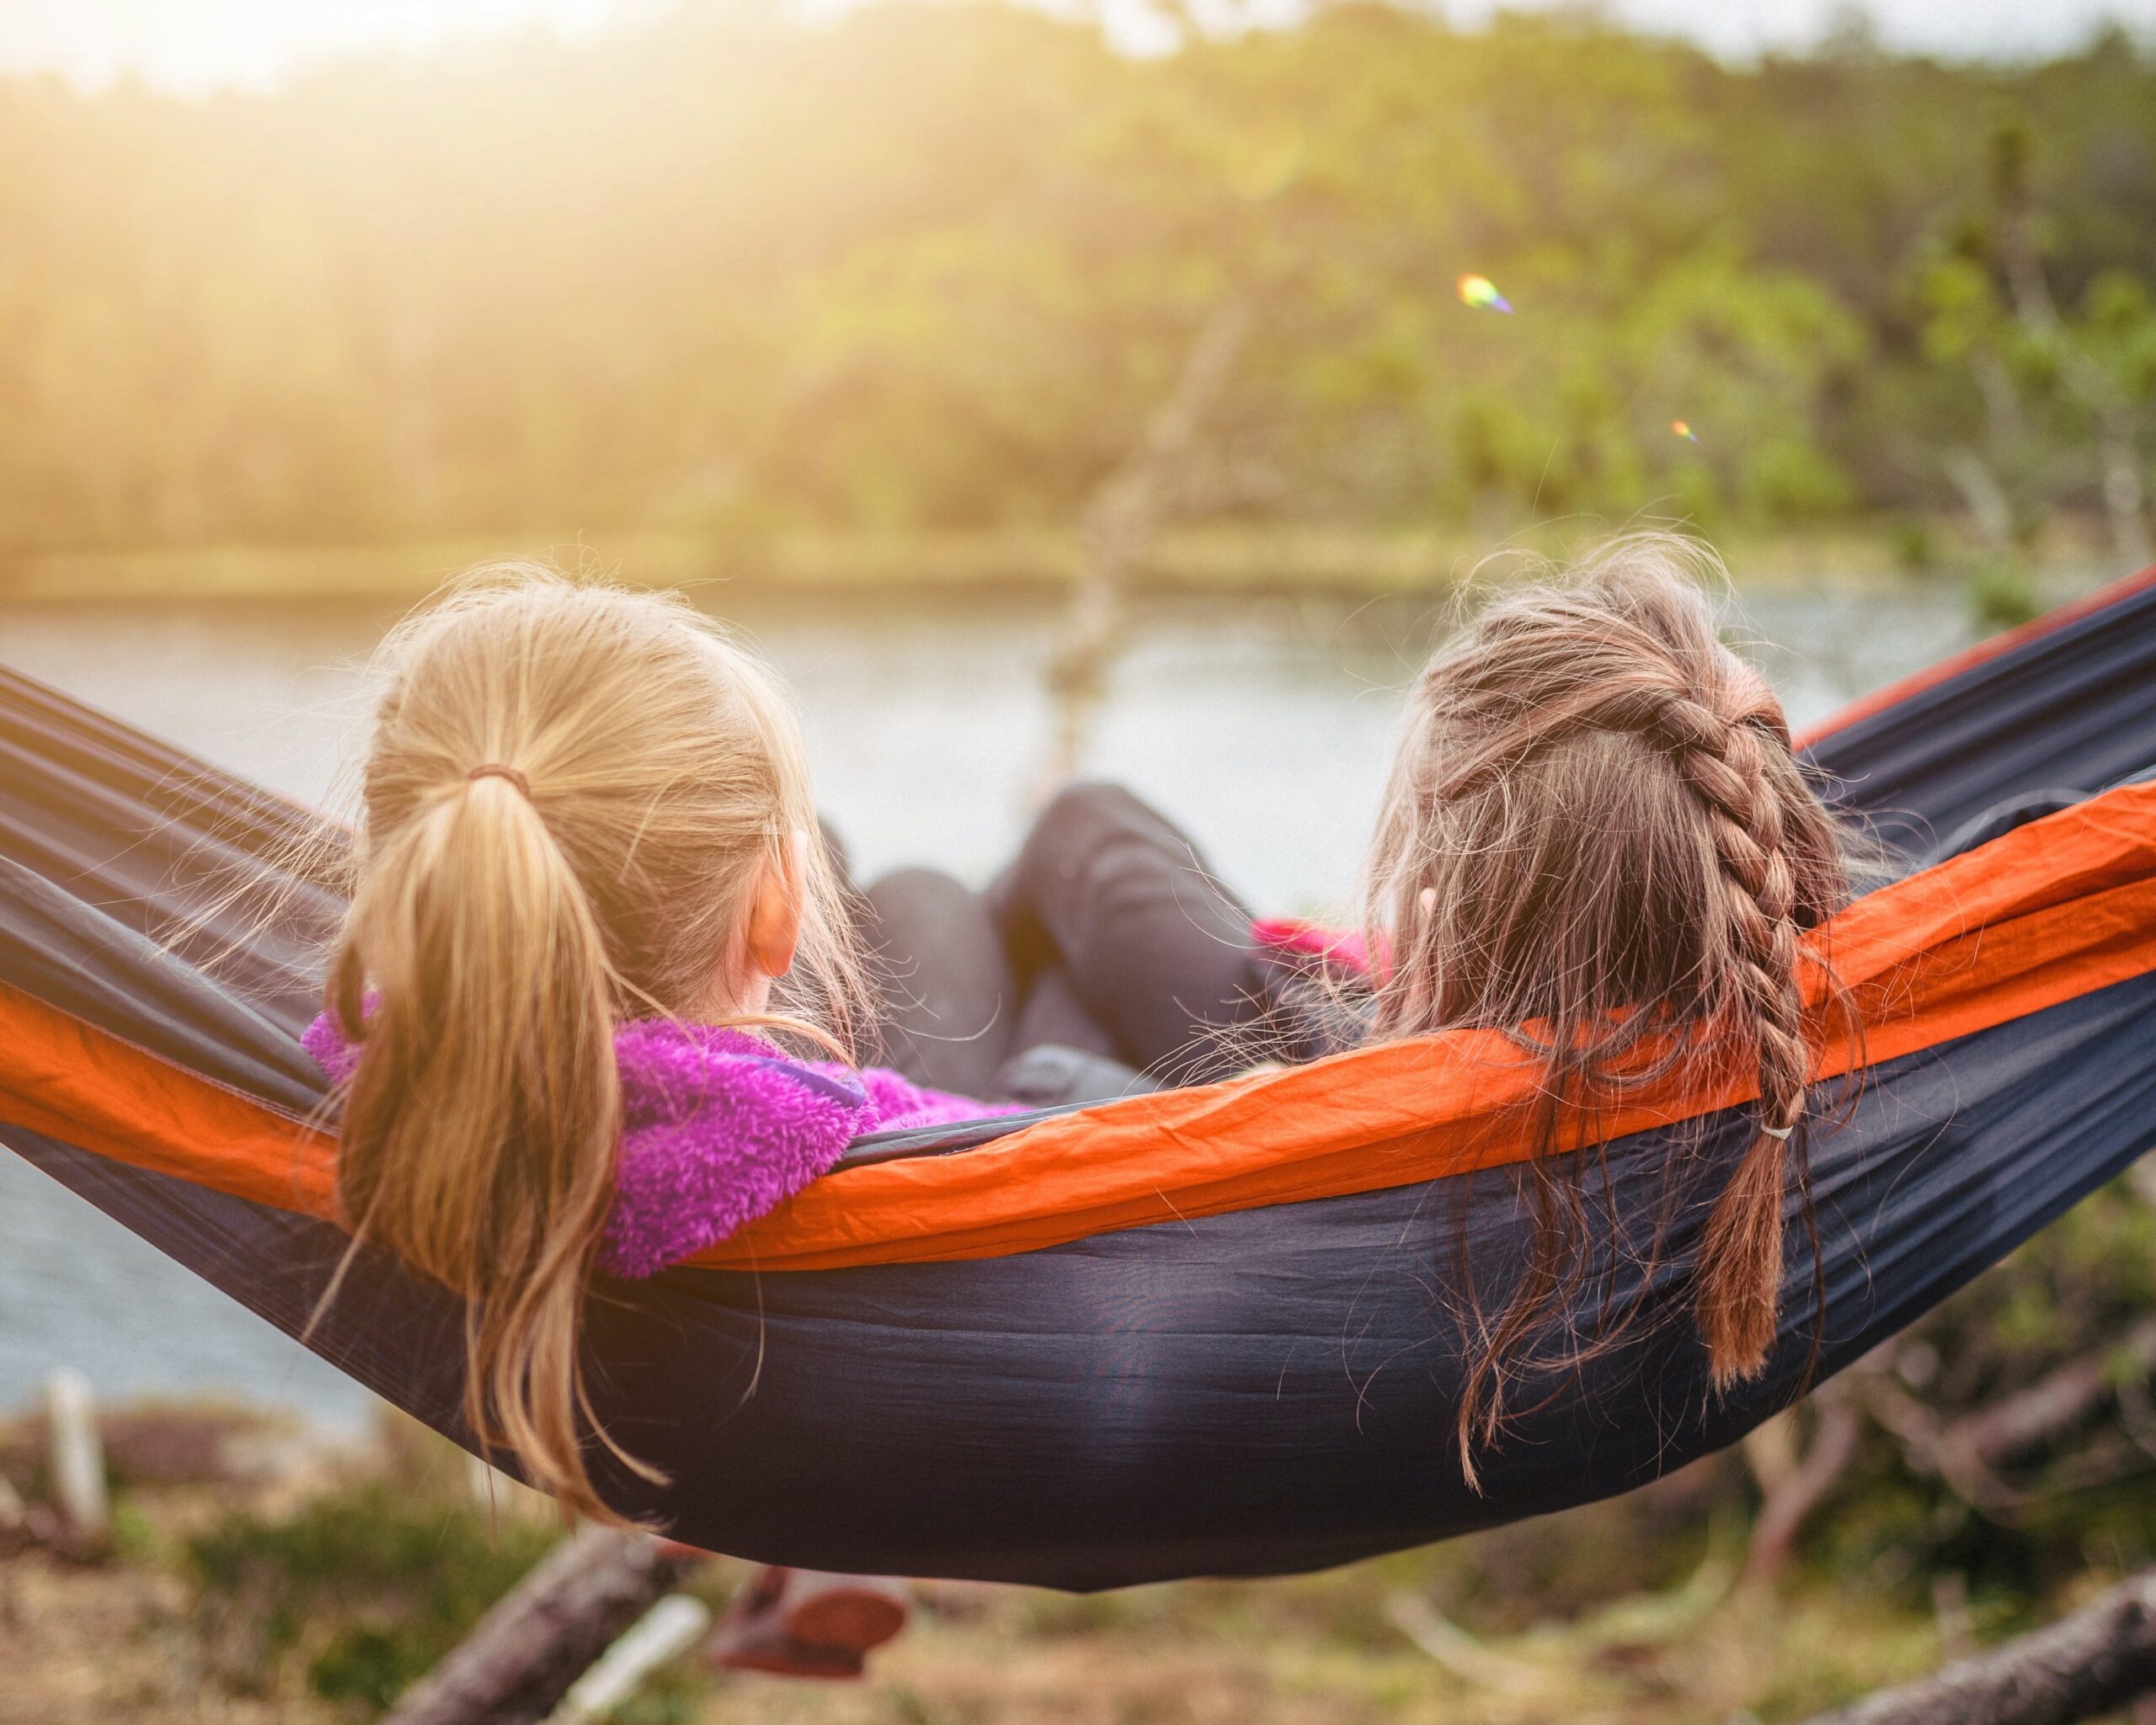 2 young children relax together in a hammock